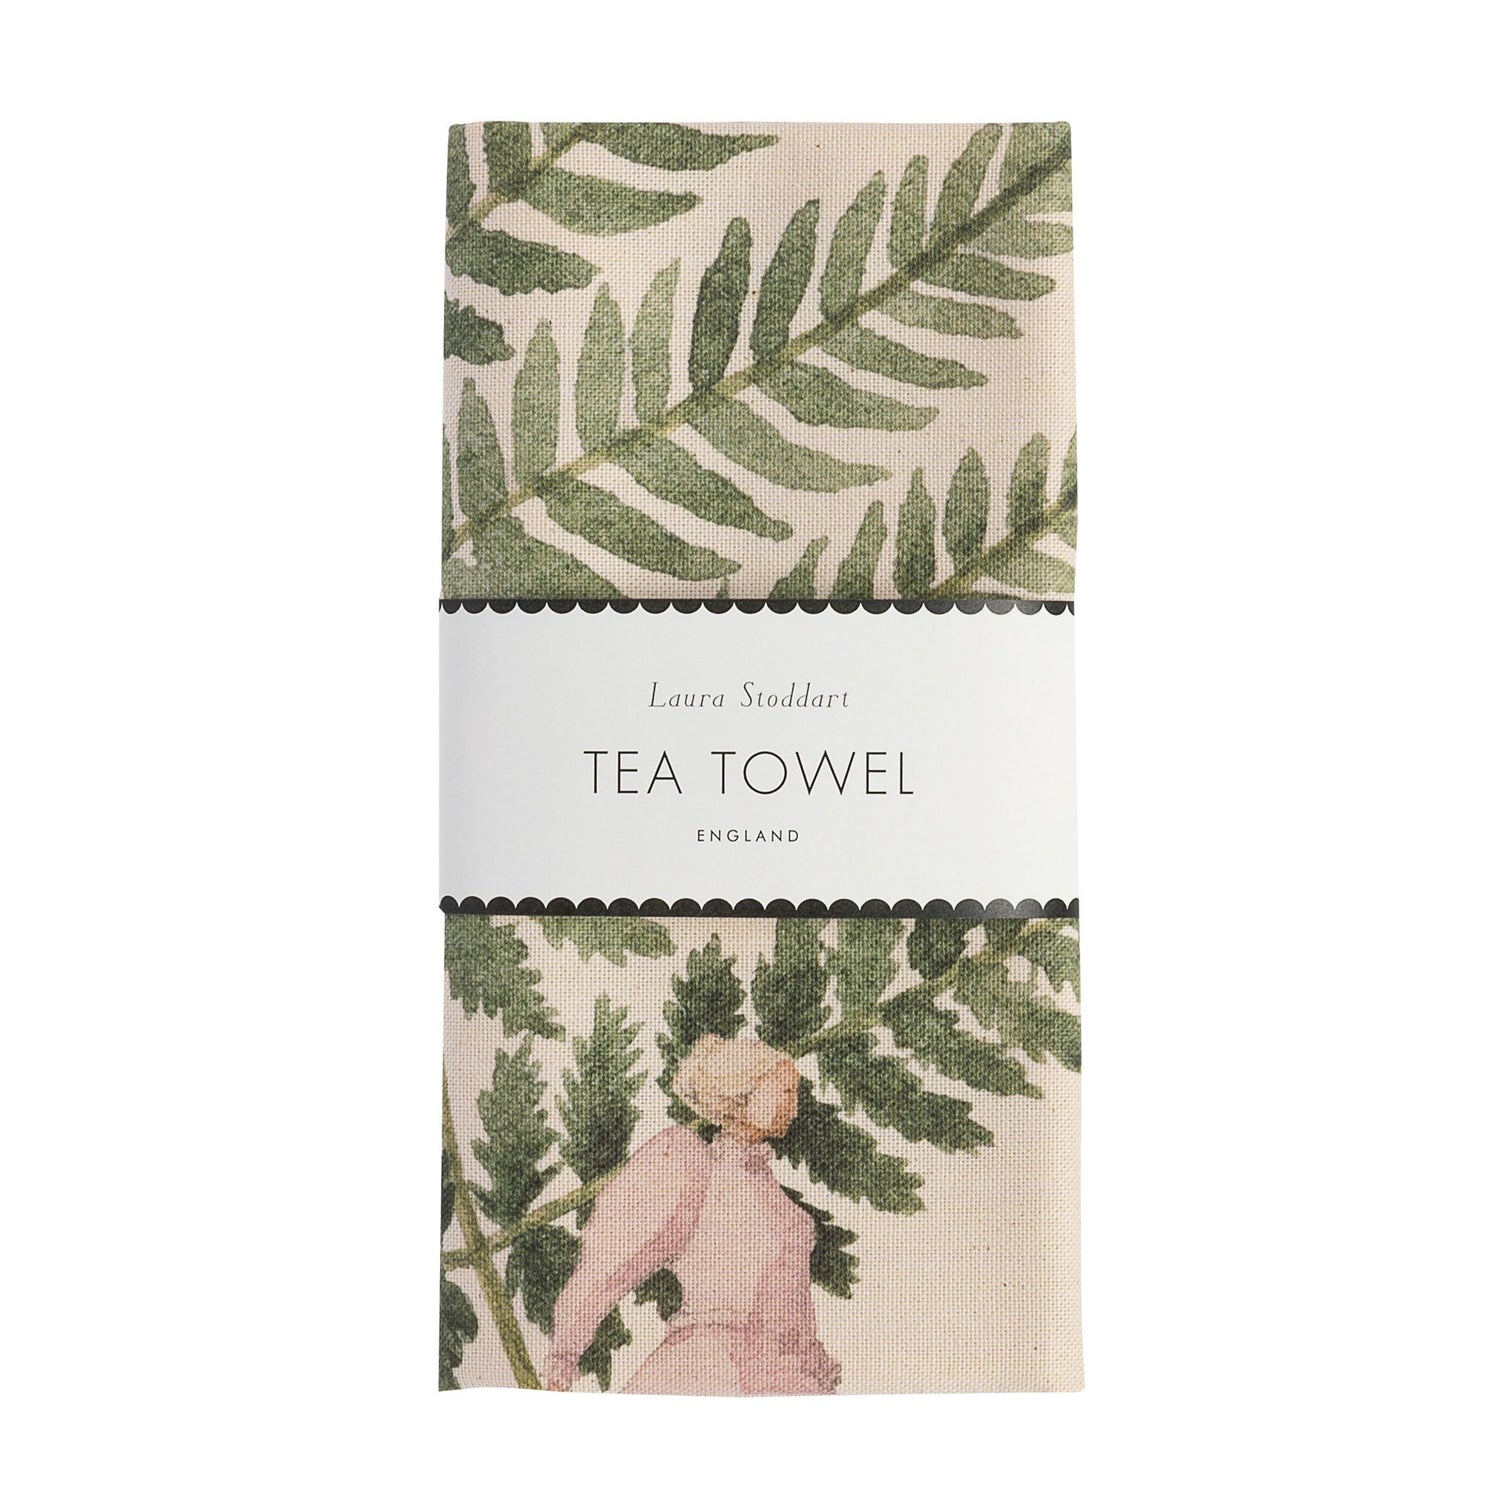 A Single Fern Tea Towel with an image of a woman holding a fern, from the &quot;Fabulous Ferns&quot; collection by Hester &amp; Cook.